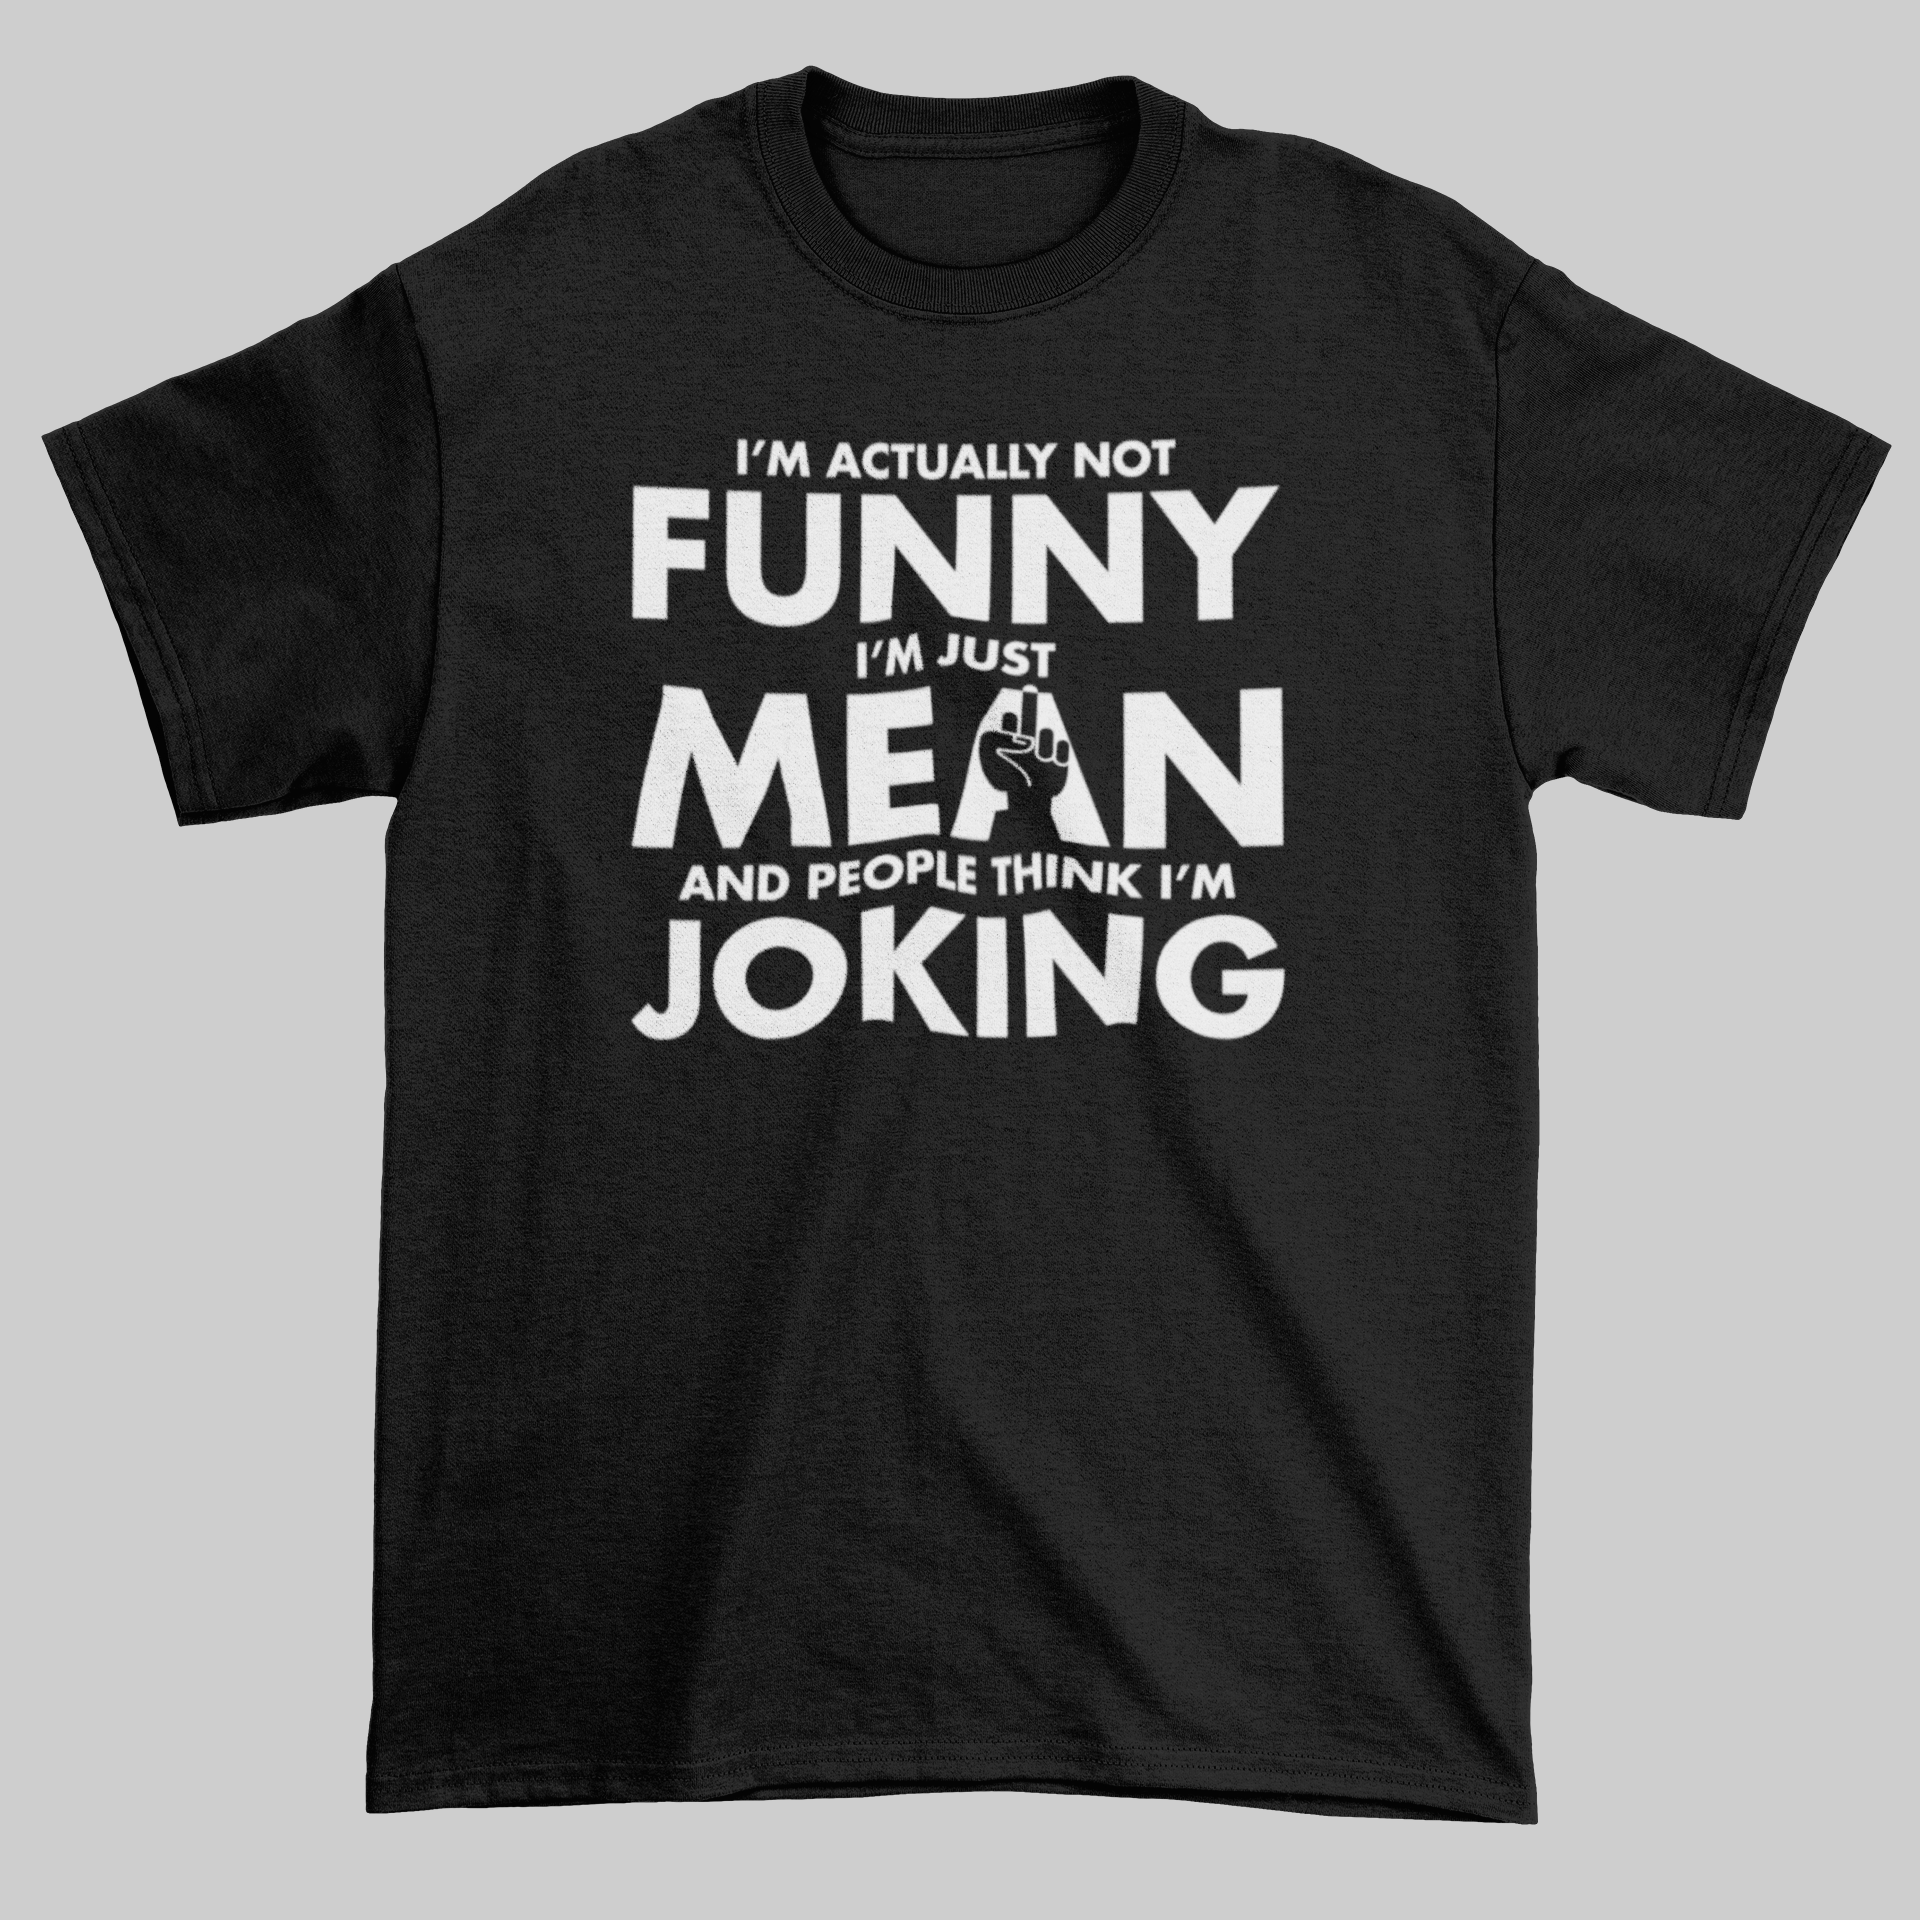 I'm Not Actually Funny - I'm Just Mean And People Think I'm Joking - Jay's Custom Prints